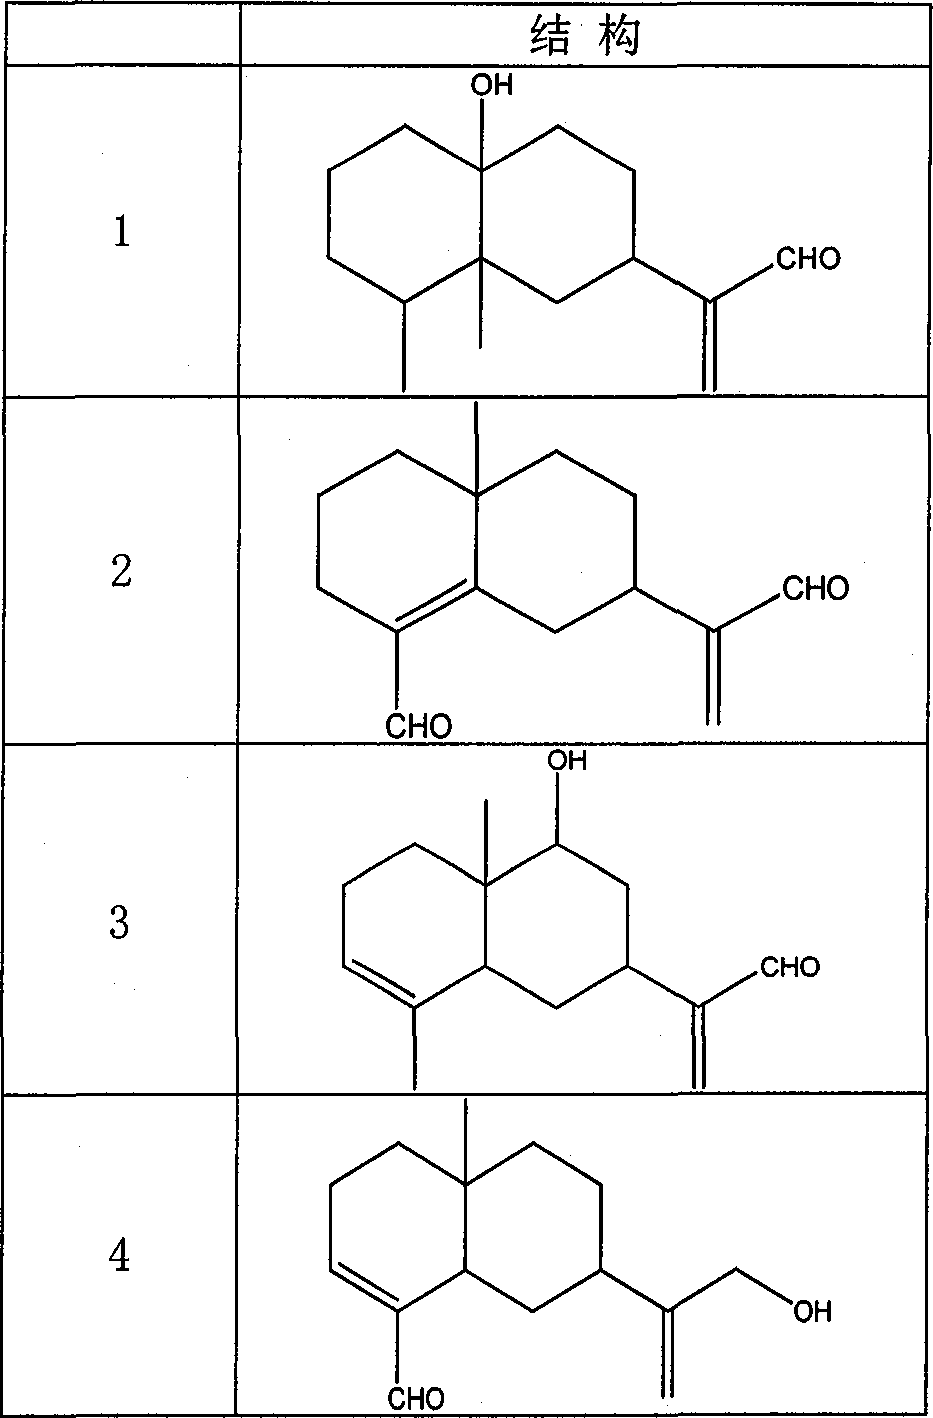 Uses of sesquiterpene derivatives in agarwood and their pharmaceutical compositions